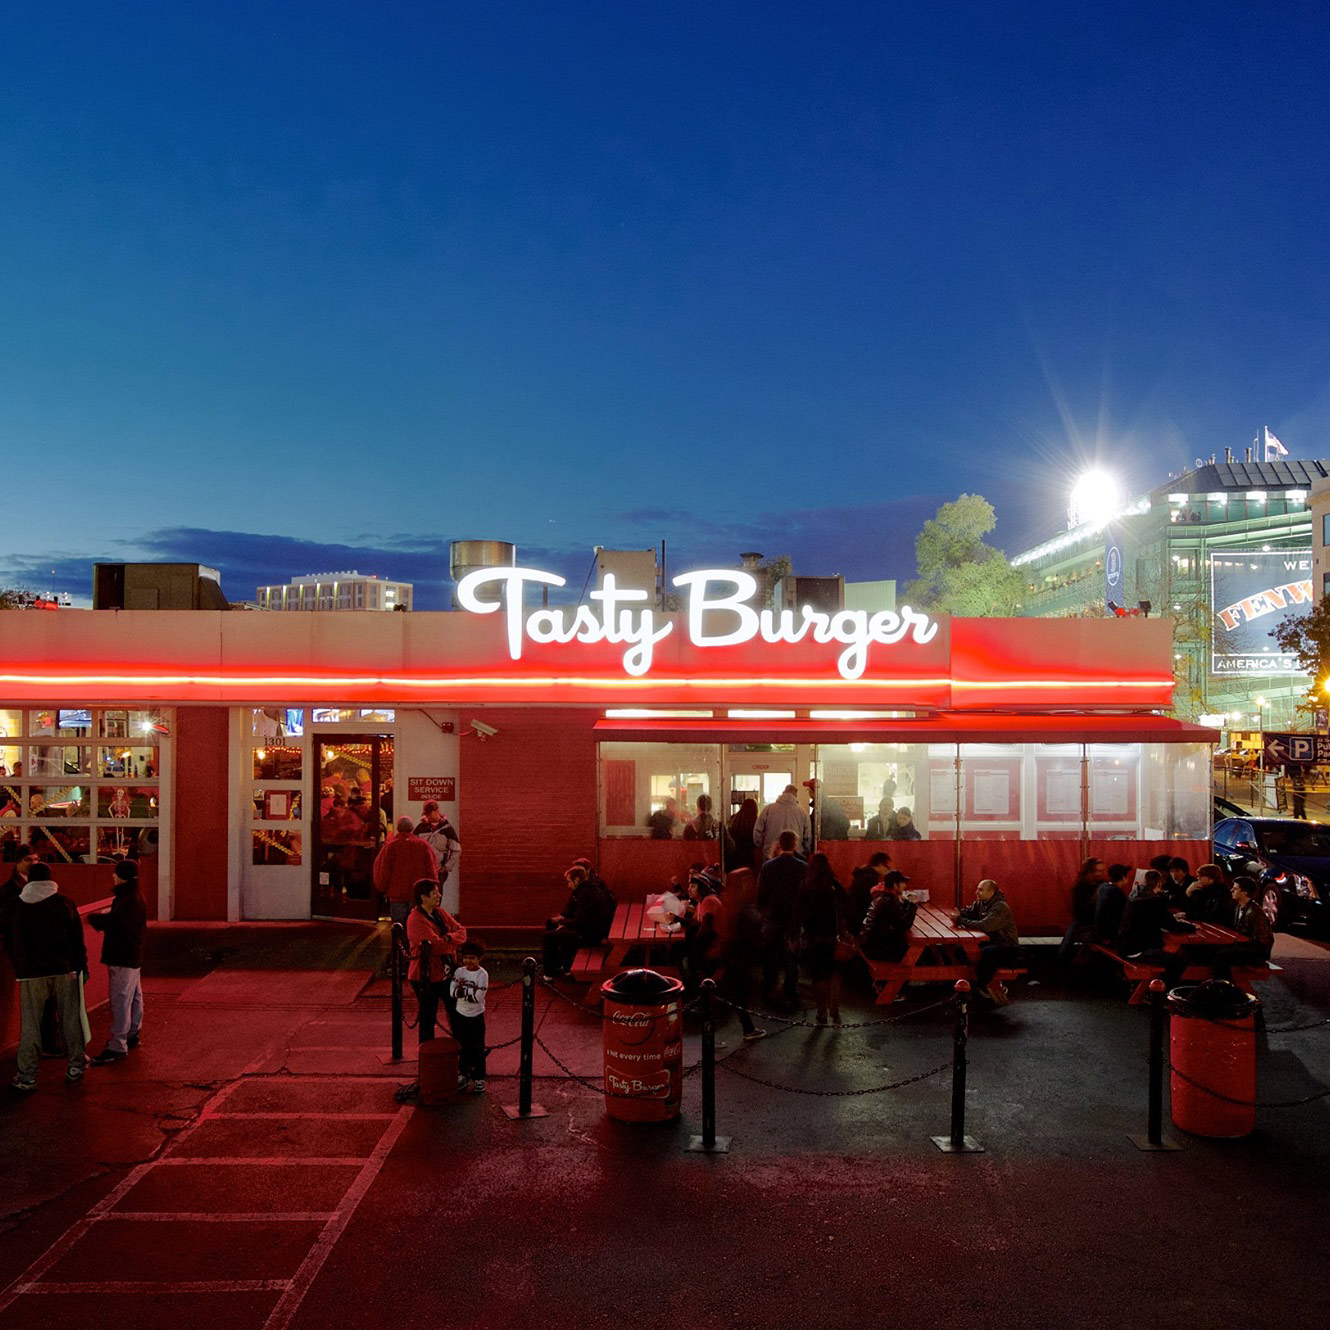 Photo of Tasty Burger at dusk. The neon sign sits on top of a single story building with a red neon trim.